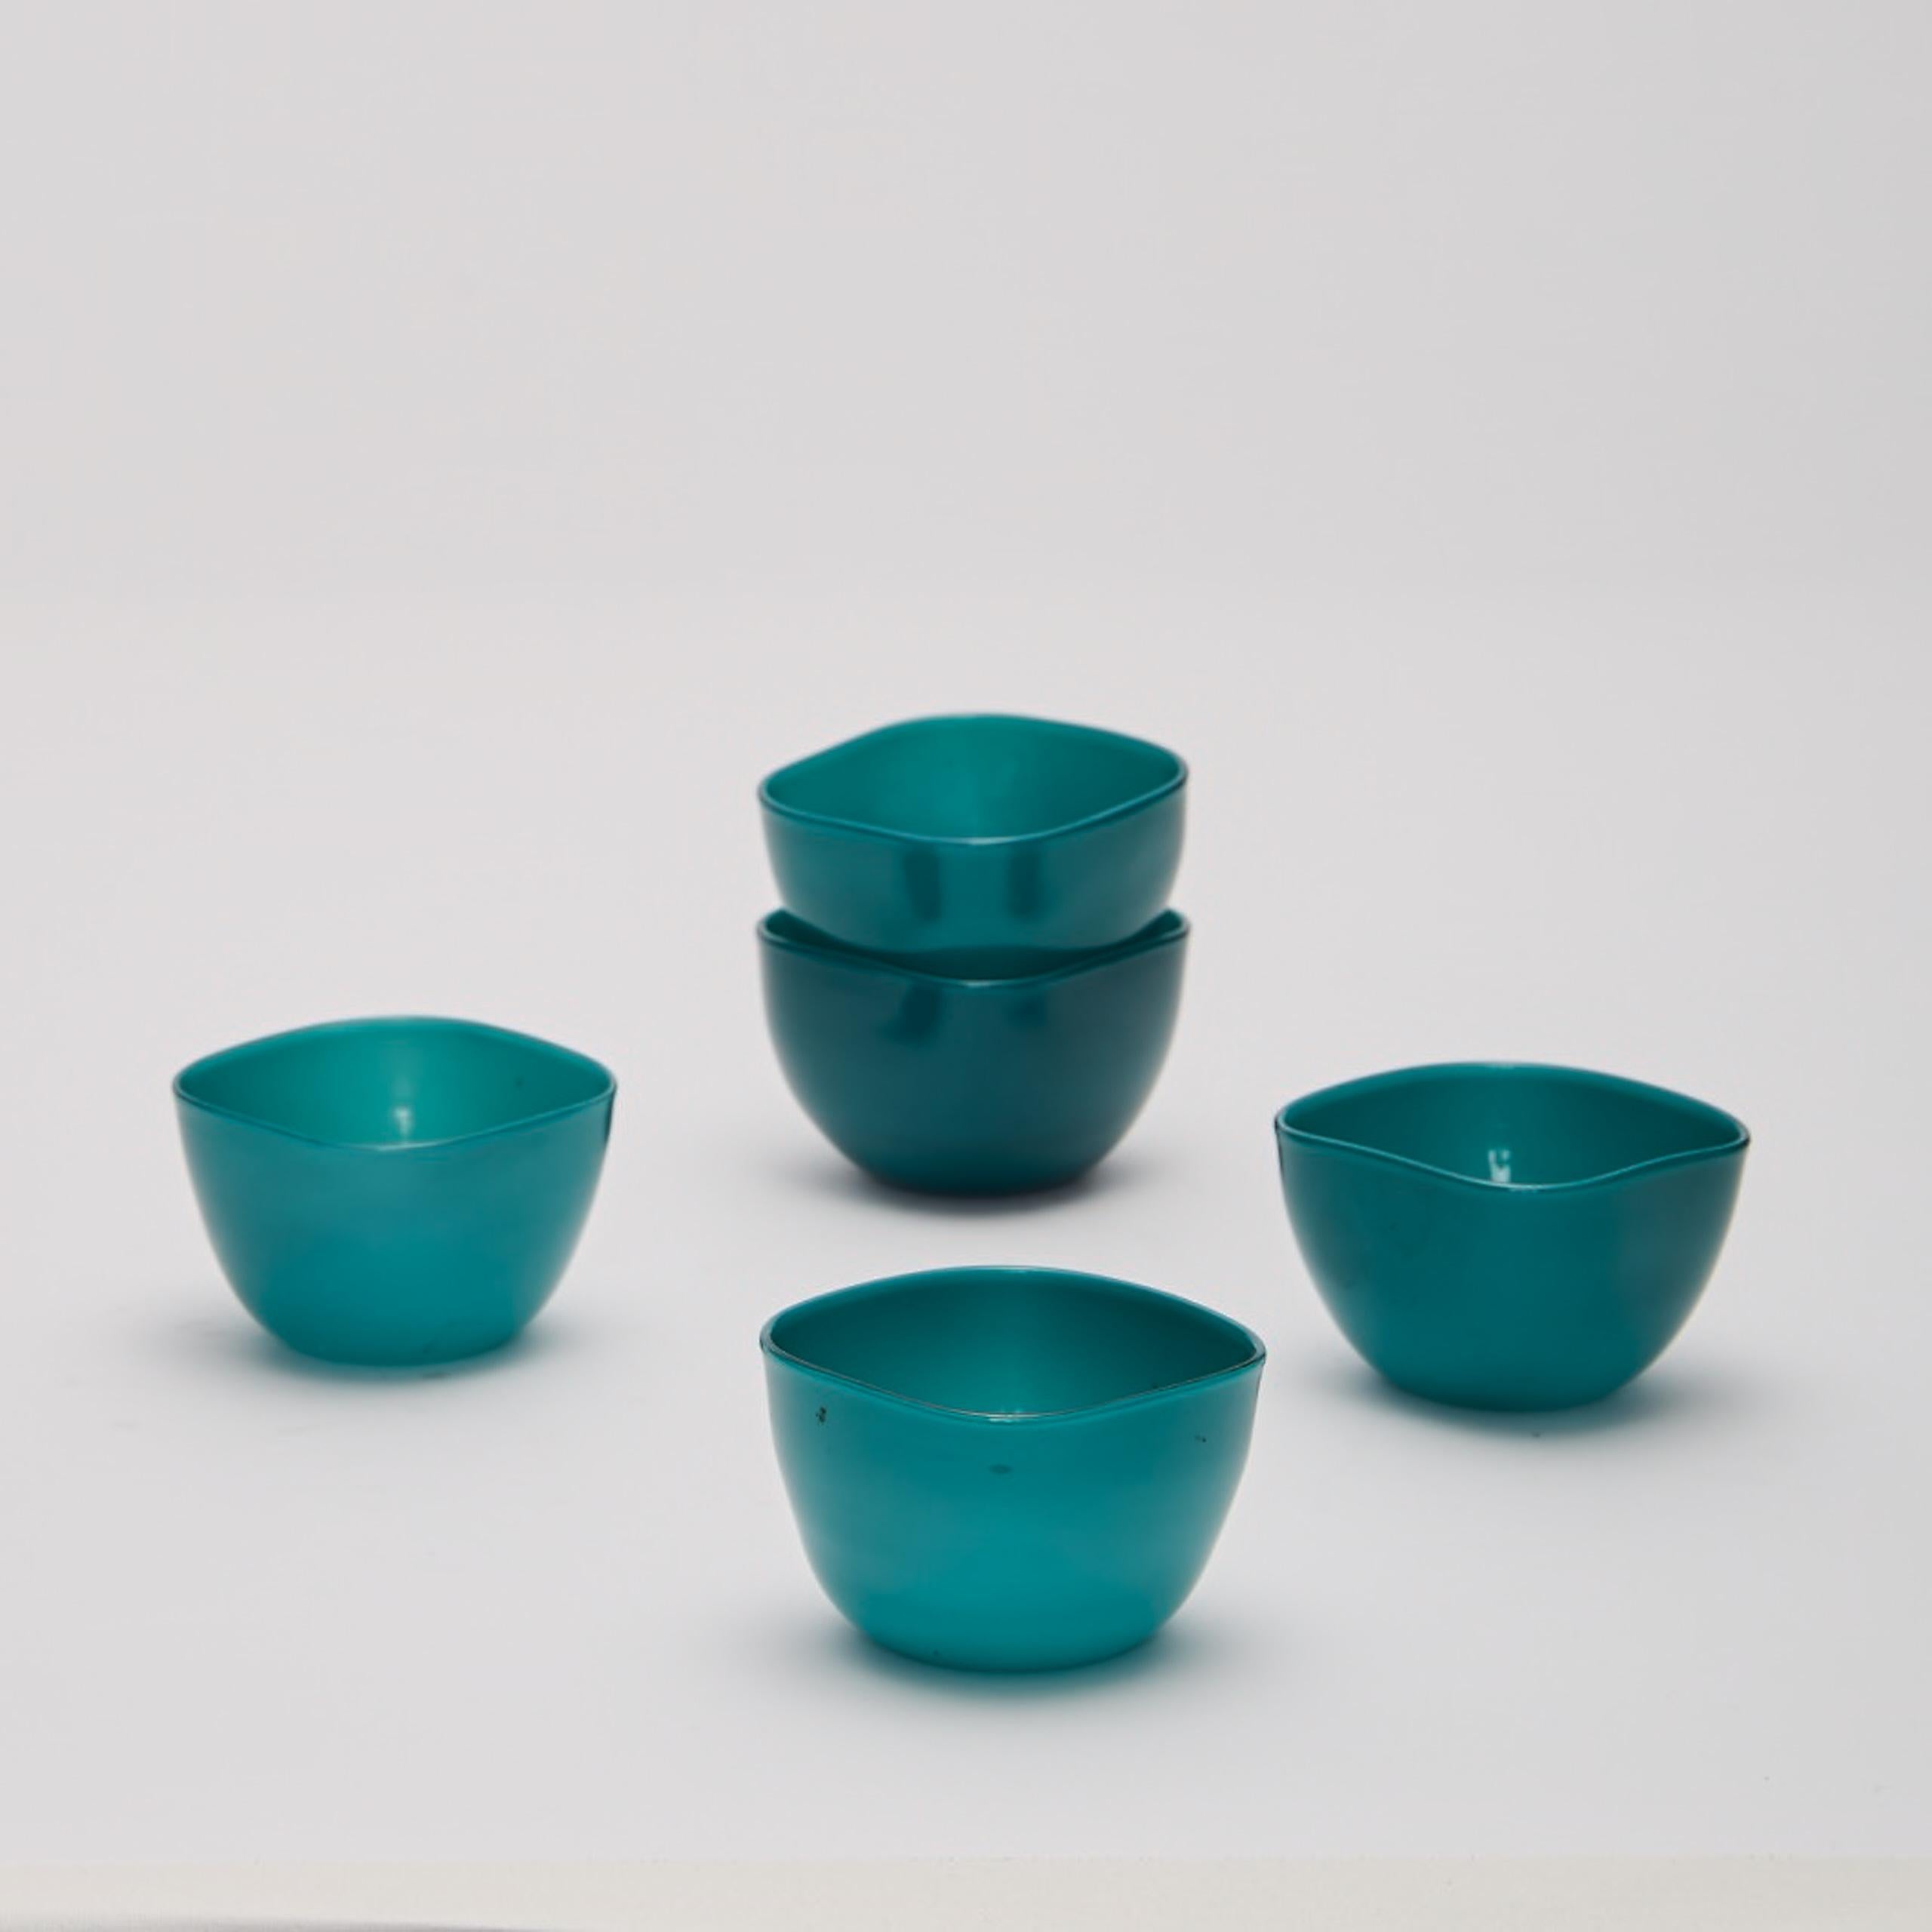 Five small turquoise opaline hand blown bowls by Paolo Venini (1895-1959) circa 1950 for Venini, opaque glass, acid stamp to each 'Venini Murano Italia'.
Dimensons; each height 1 1/2 in (4 cm); width 2 1/6 in (6 cm).

